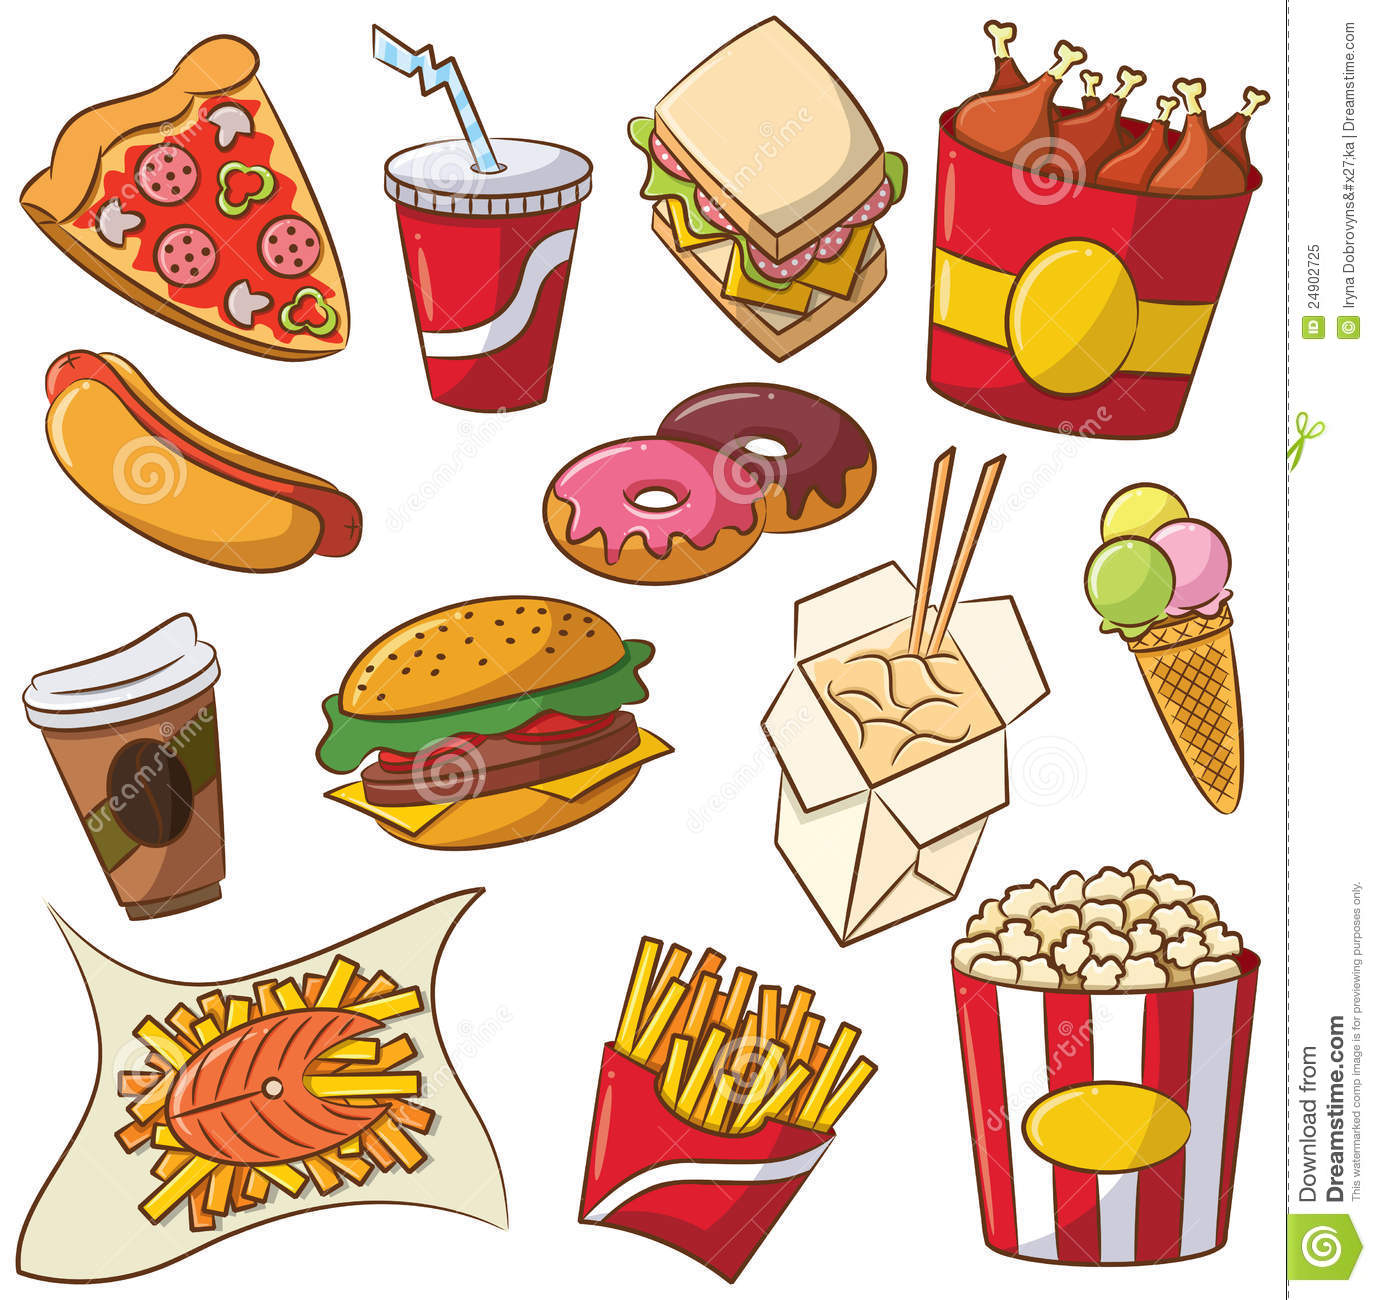 healthy food clipart